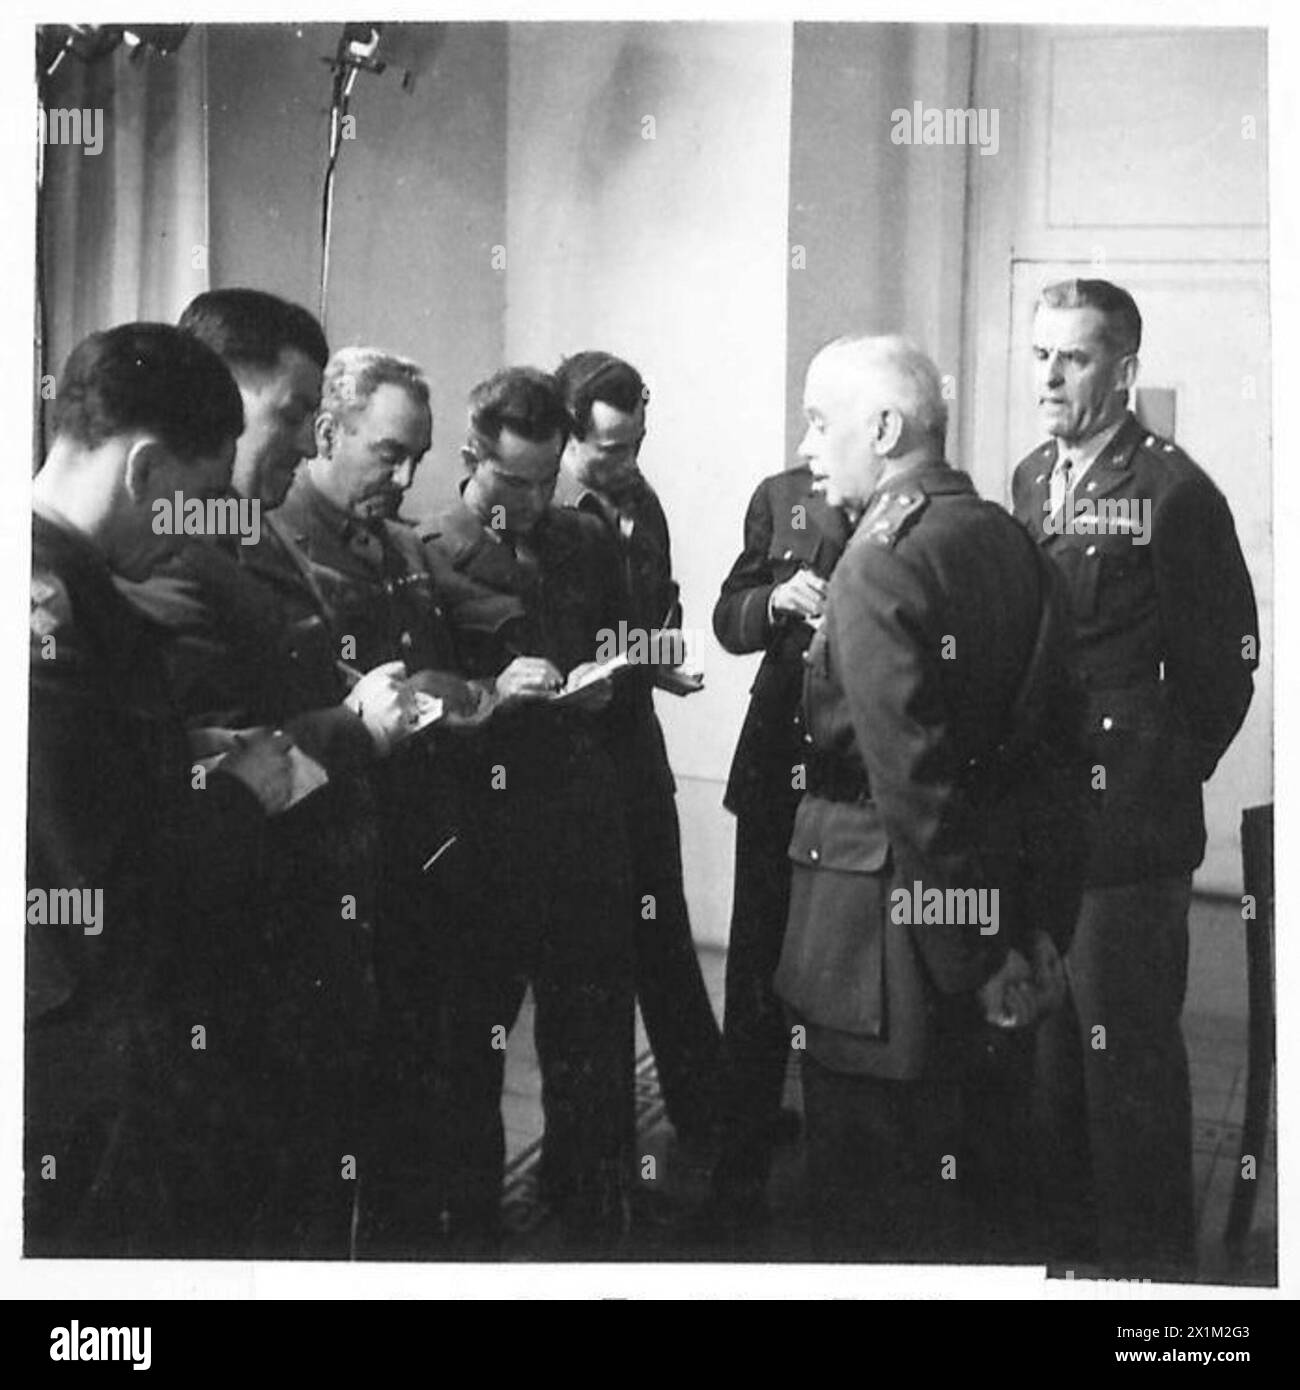 ALLIED FORCE HEADQUARTERS : ITALY UNCONDITIONAL SURRENDER - Lieutenant General W.D. Morgan (hands clasped) addresses the Press just after the short nine minute meeting of German and Allied Forces representatives that culminated in the unconditional surrender of all German Forces in Italy and Western Austria to the Allies. Presenting the Press, from left to right, are:- Lieut.W.R. Taylor, Union Jack Patrick Smith, B.B.C. Hubert Harrison, Reuter Howard Taubman, Stars & Stripes Winston Burdett, C.B.S. (obscured) Herbert King, United Press Brigadier General A.J. McChrystal, Chief Information, News Stock Photo